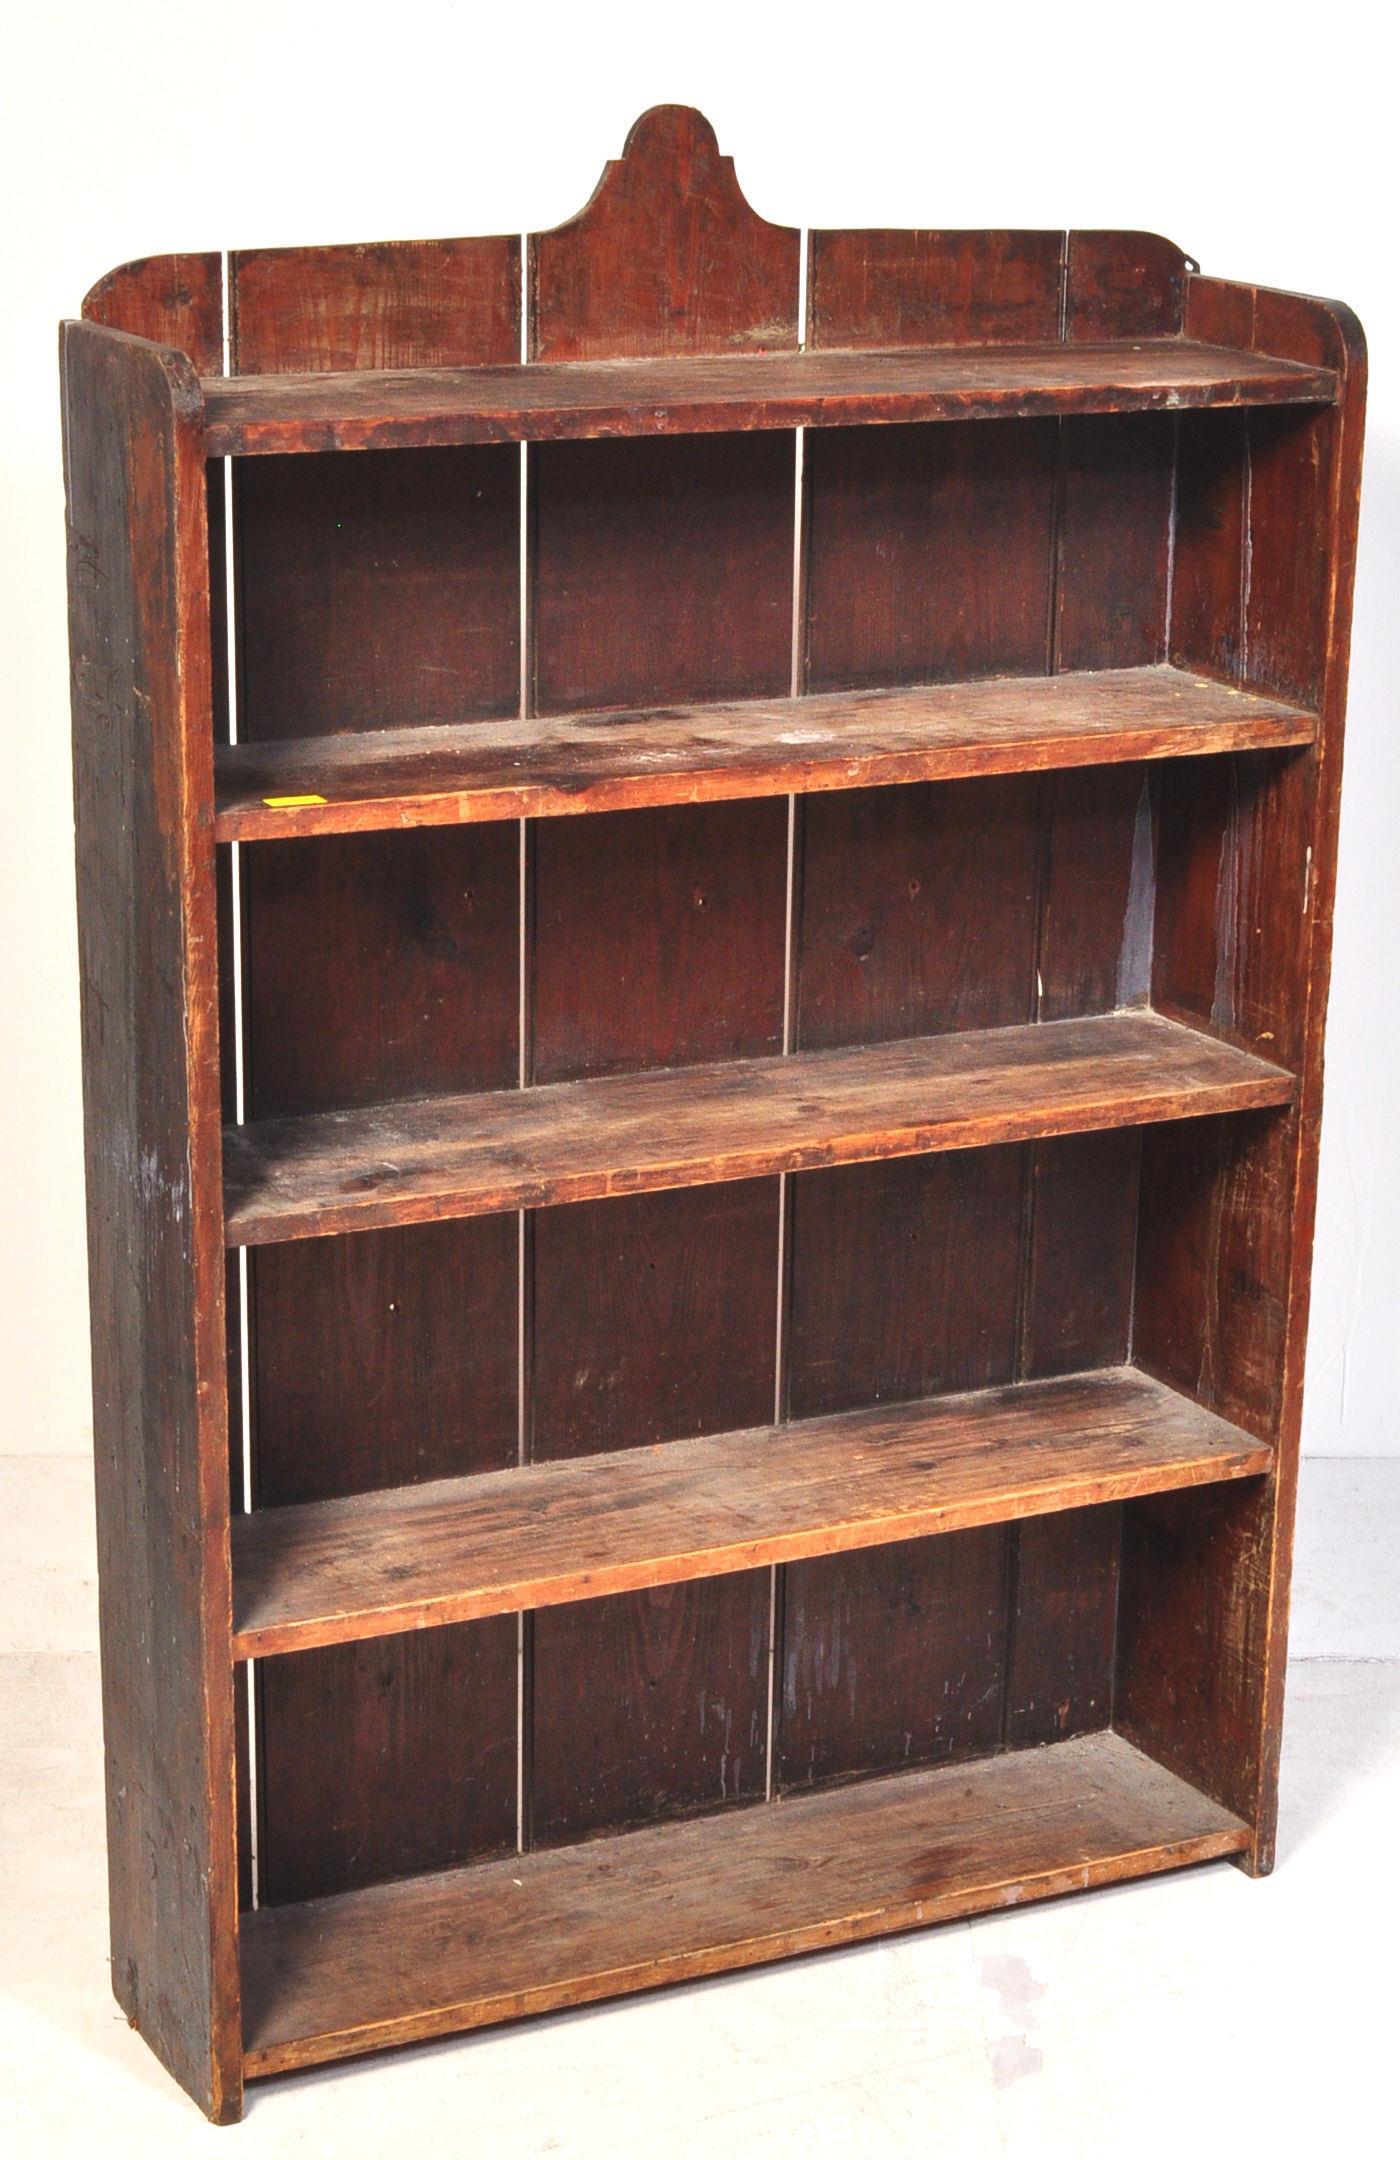 LATE VICTORIAN STAINED PINE OPEN WINDOW BOOKCASE - Image 2 of 5